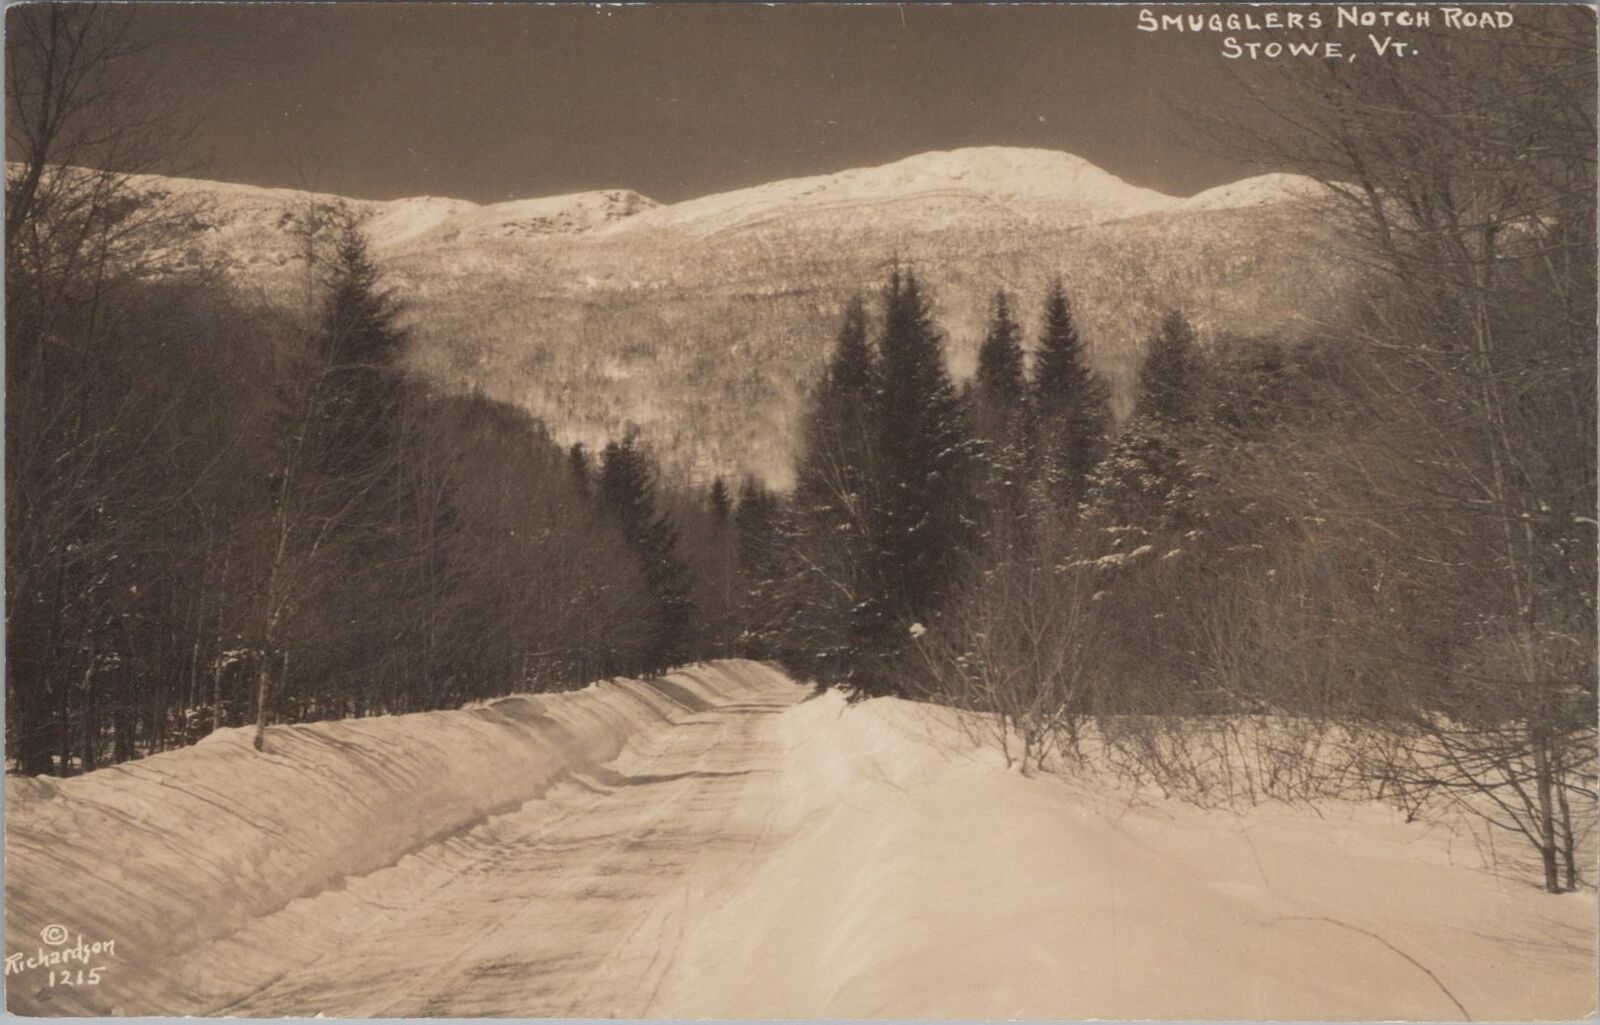 Smugglers Notch Road Stowe Vermont Snow Scene Mt.Mansfield 1941 RPPC Postcard